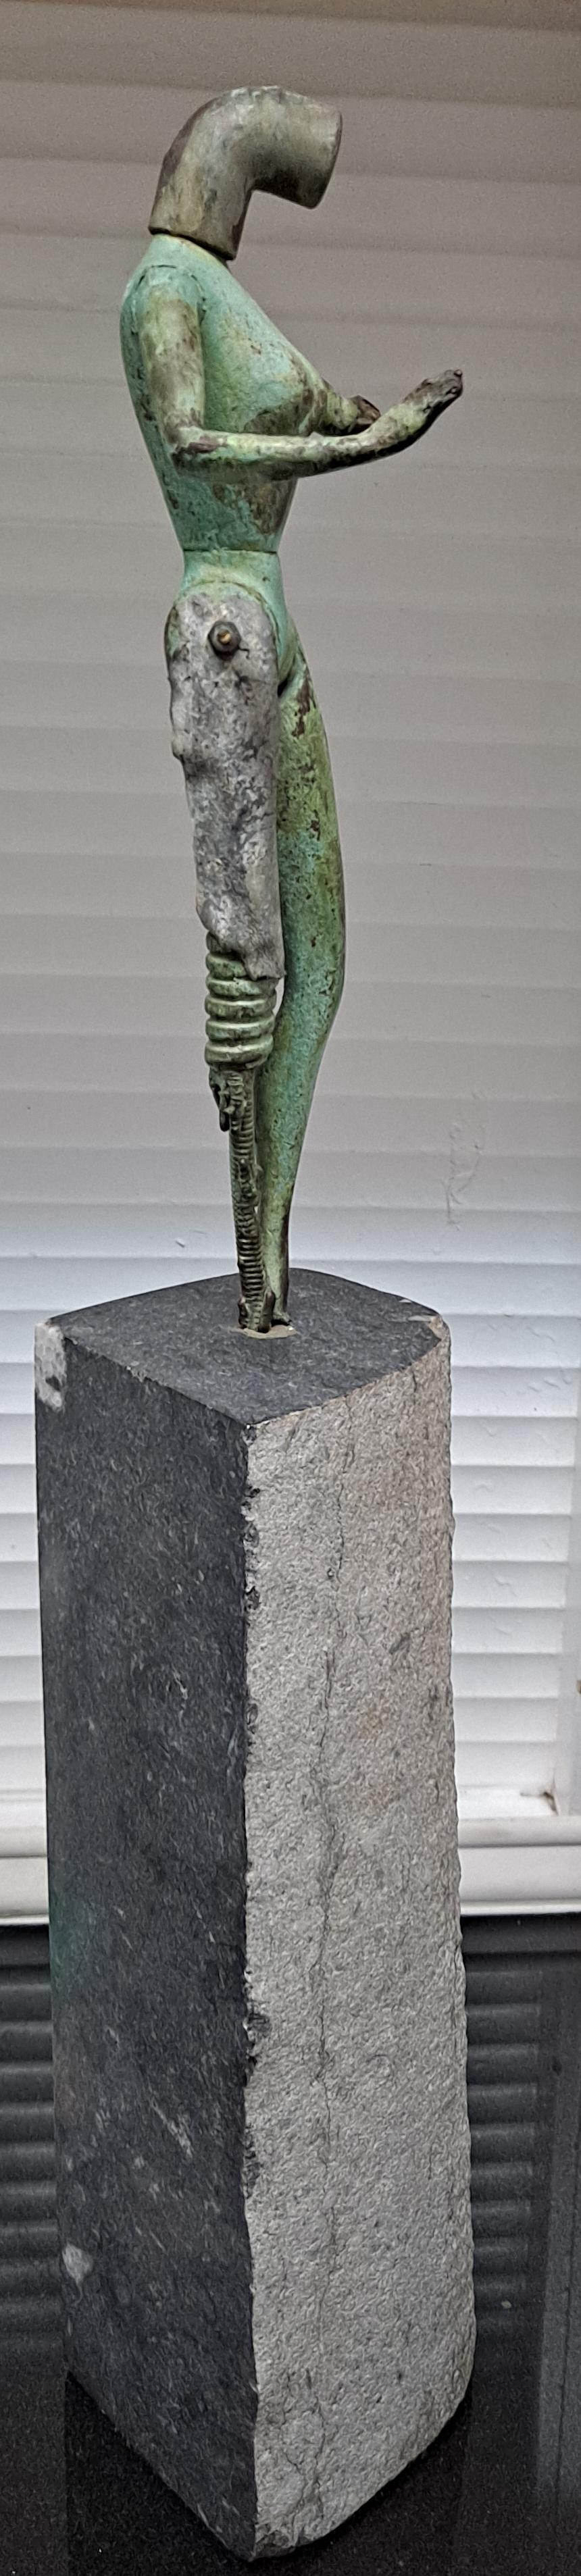 Modernist Metal Sculpture of a Female Form Fixed on a Tower of Granite Base

Signed 